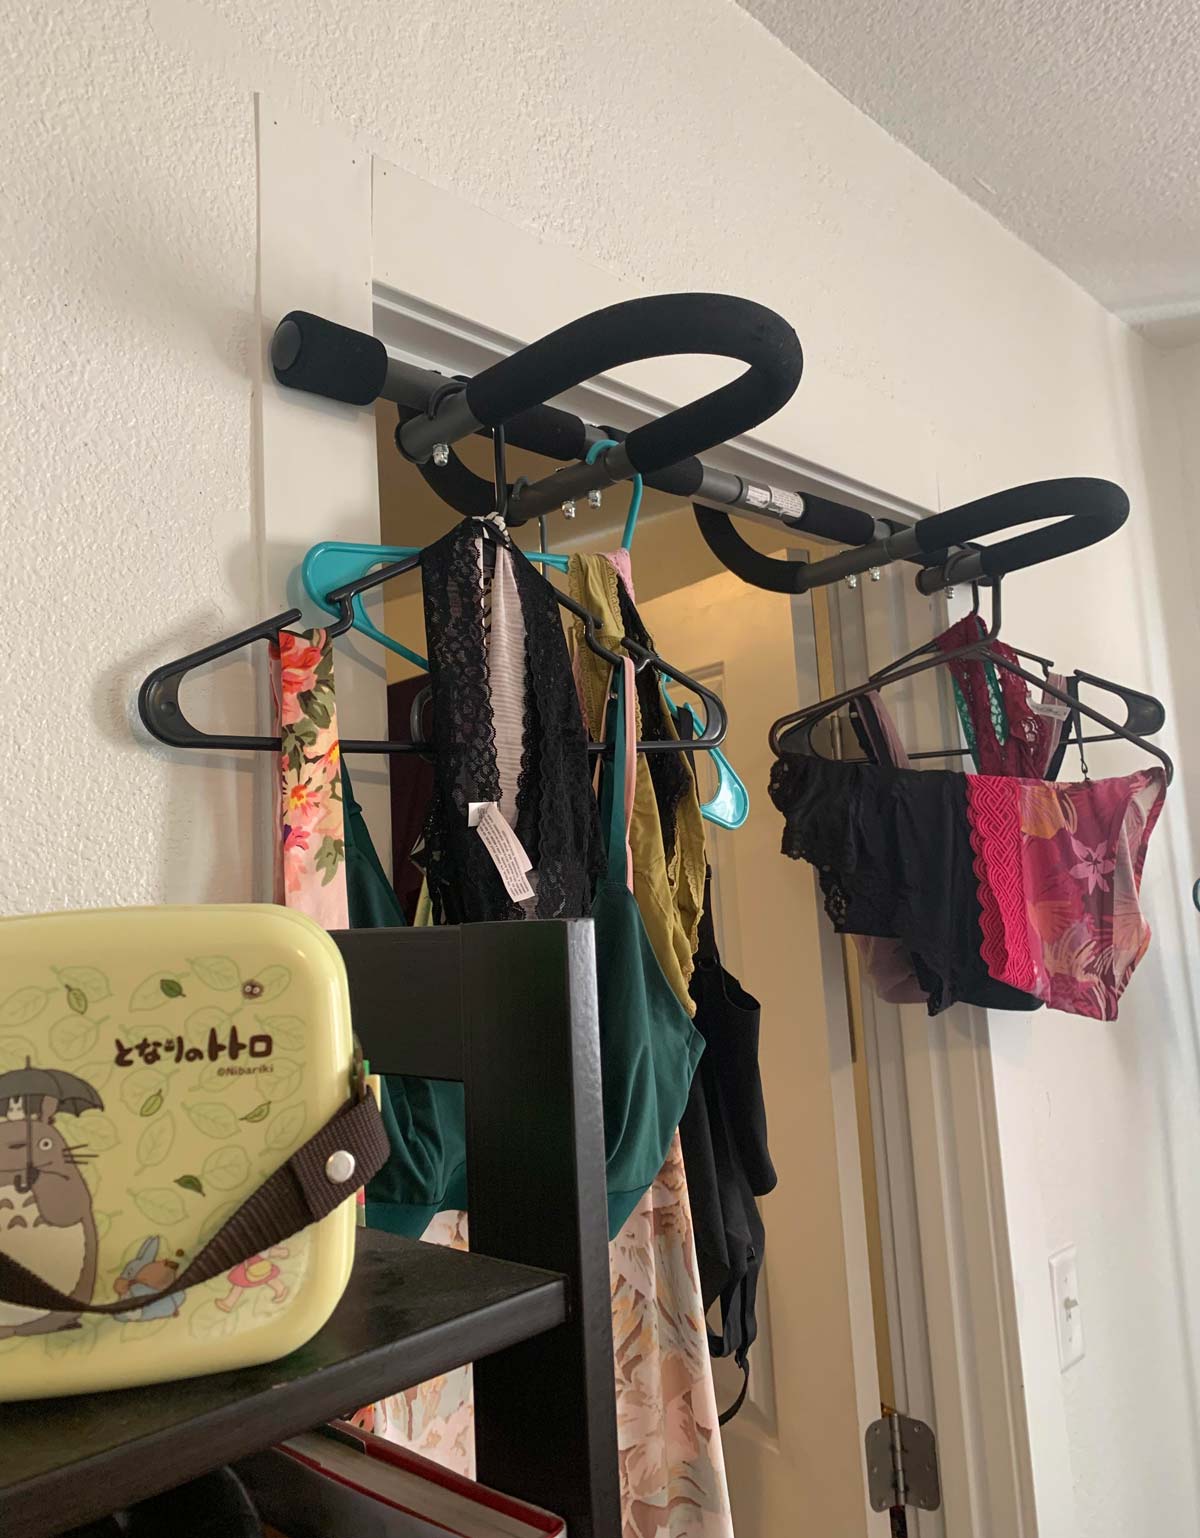 Humblebrag here. I’ve been using my pull-up bar a lot lately